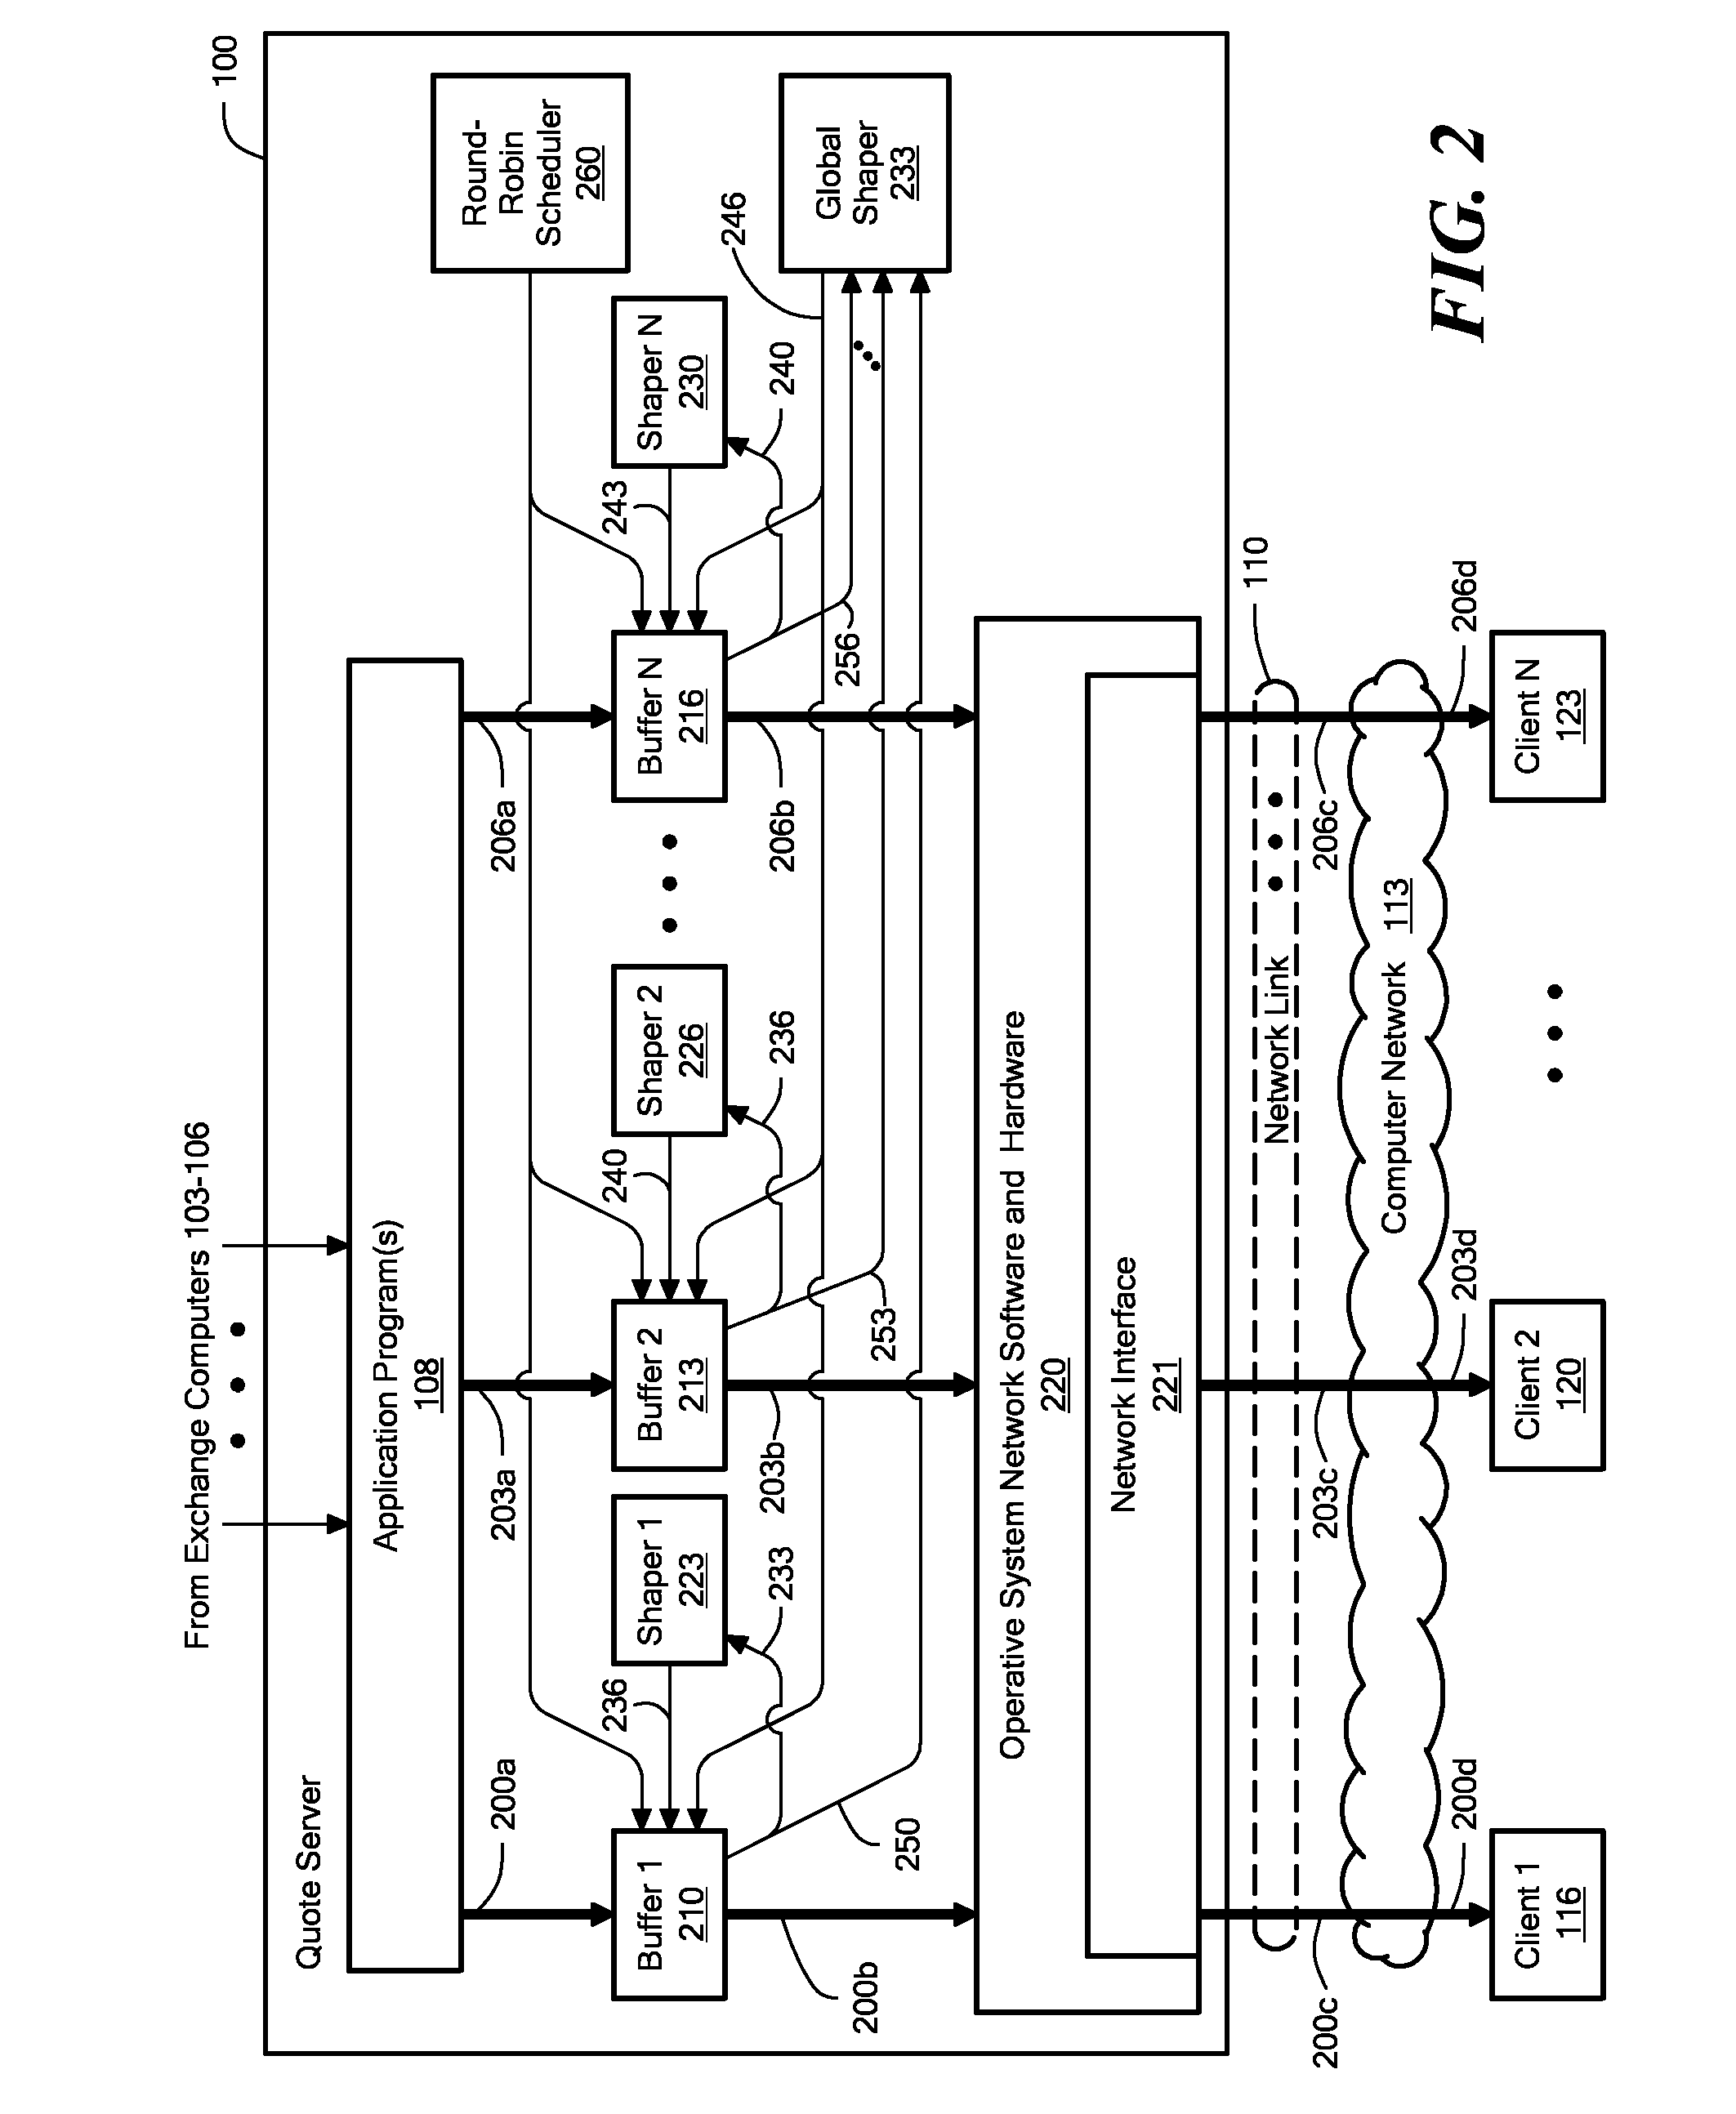 Rate-Adaptive Bundling of Data in a Packetized Communication System